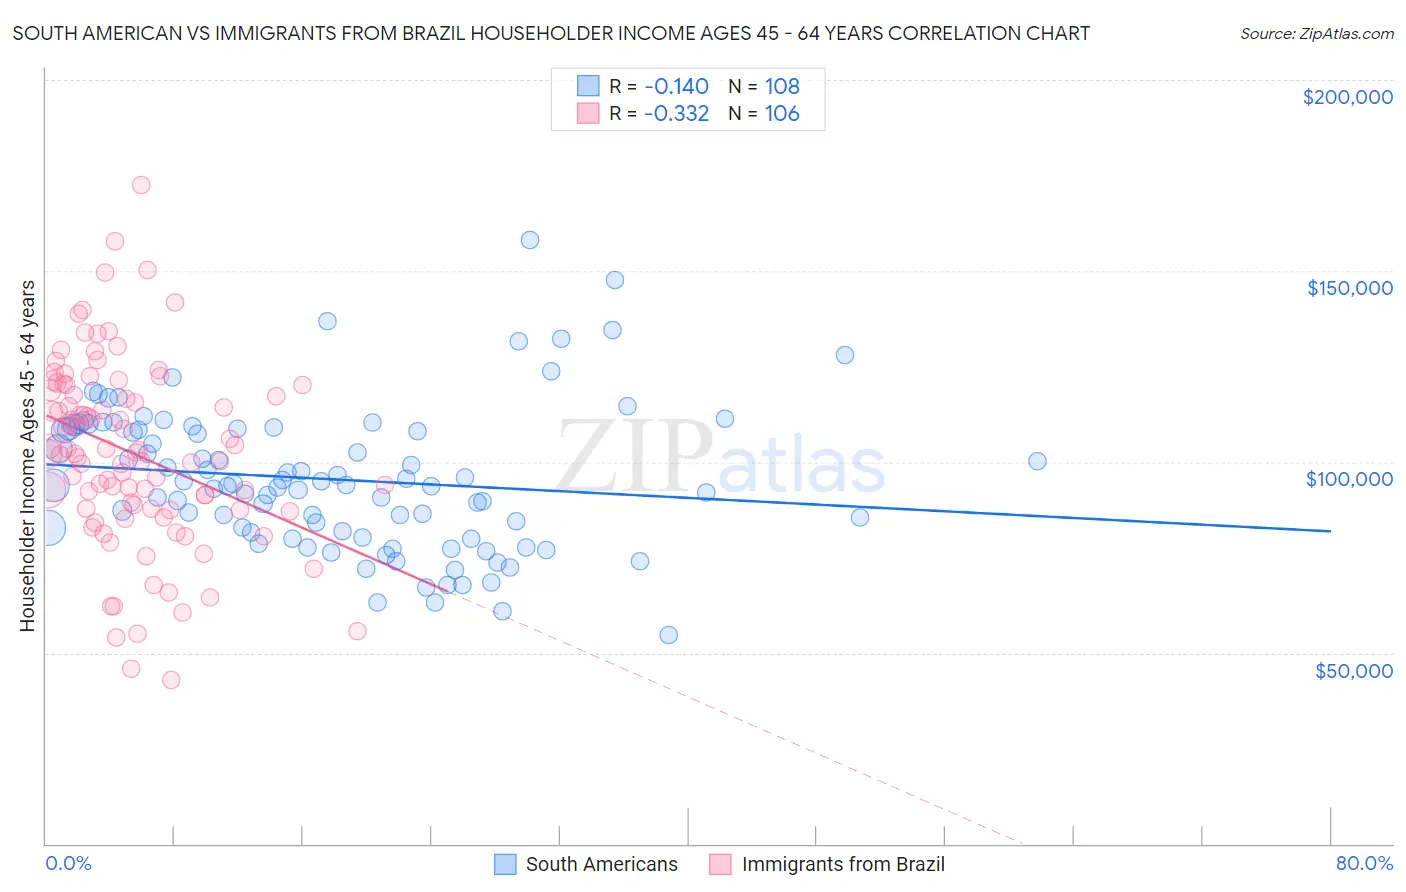 South American vs Immigrants from Brazil Householder Income Ages 45 - 64 years